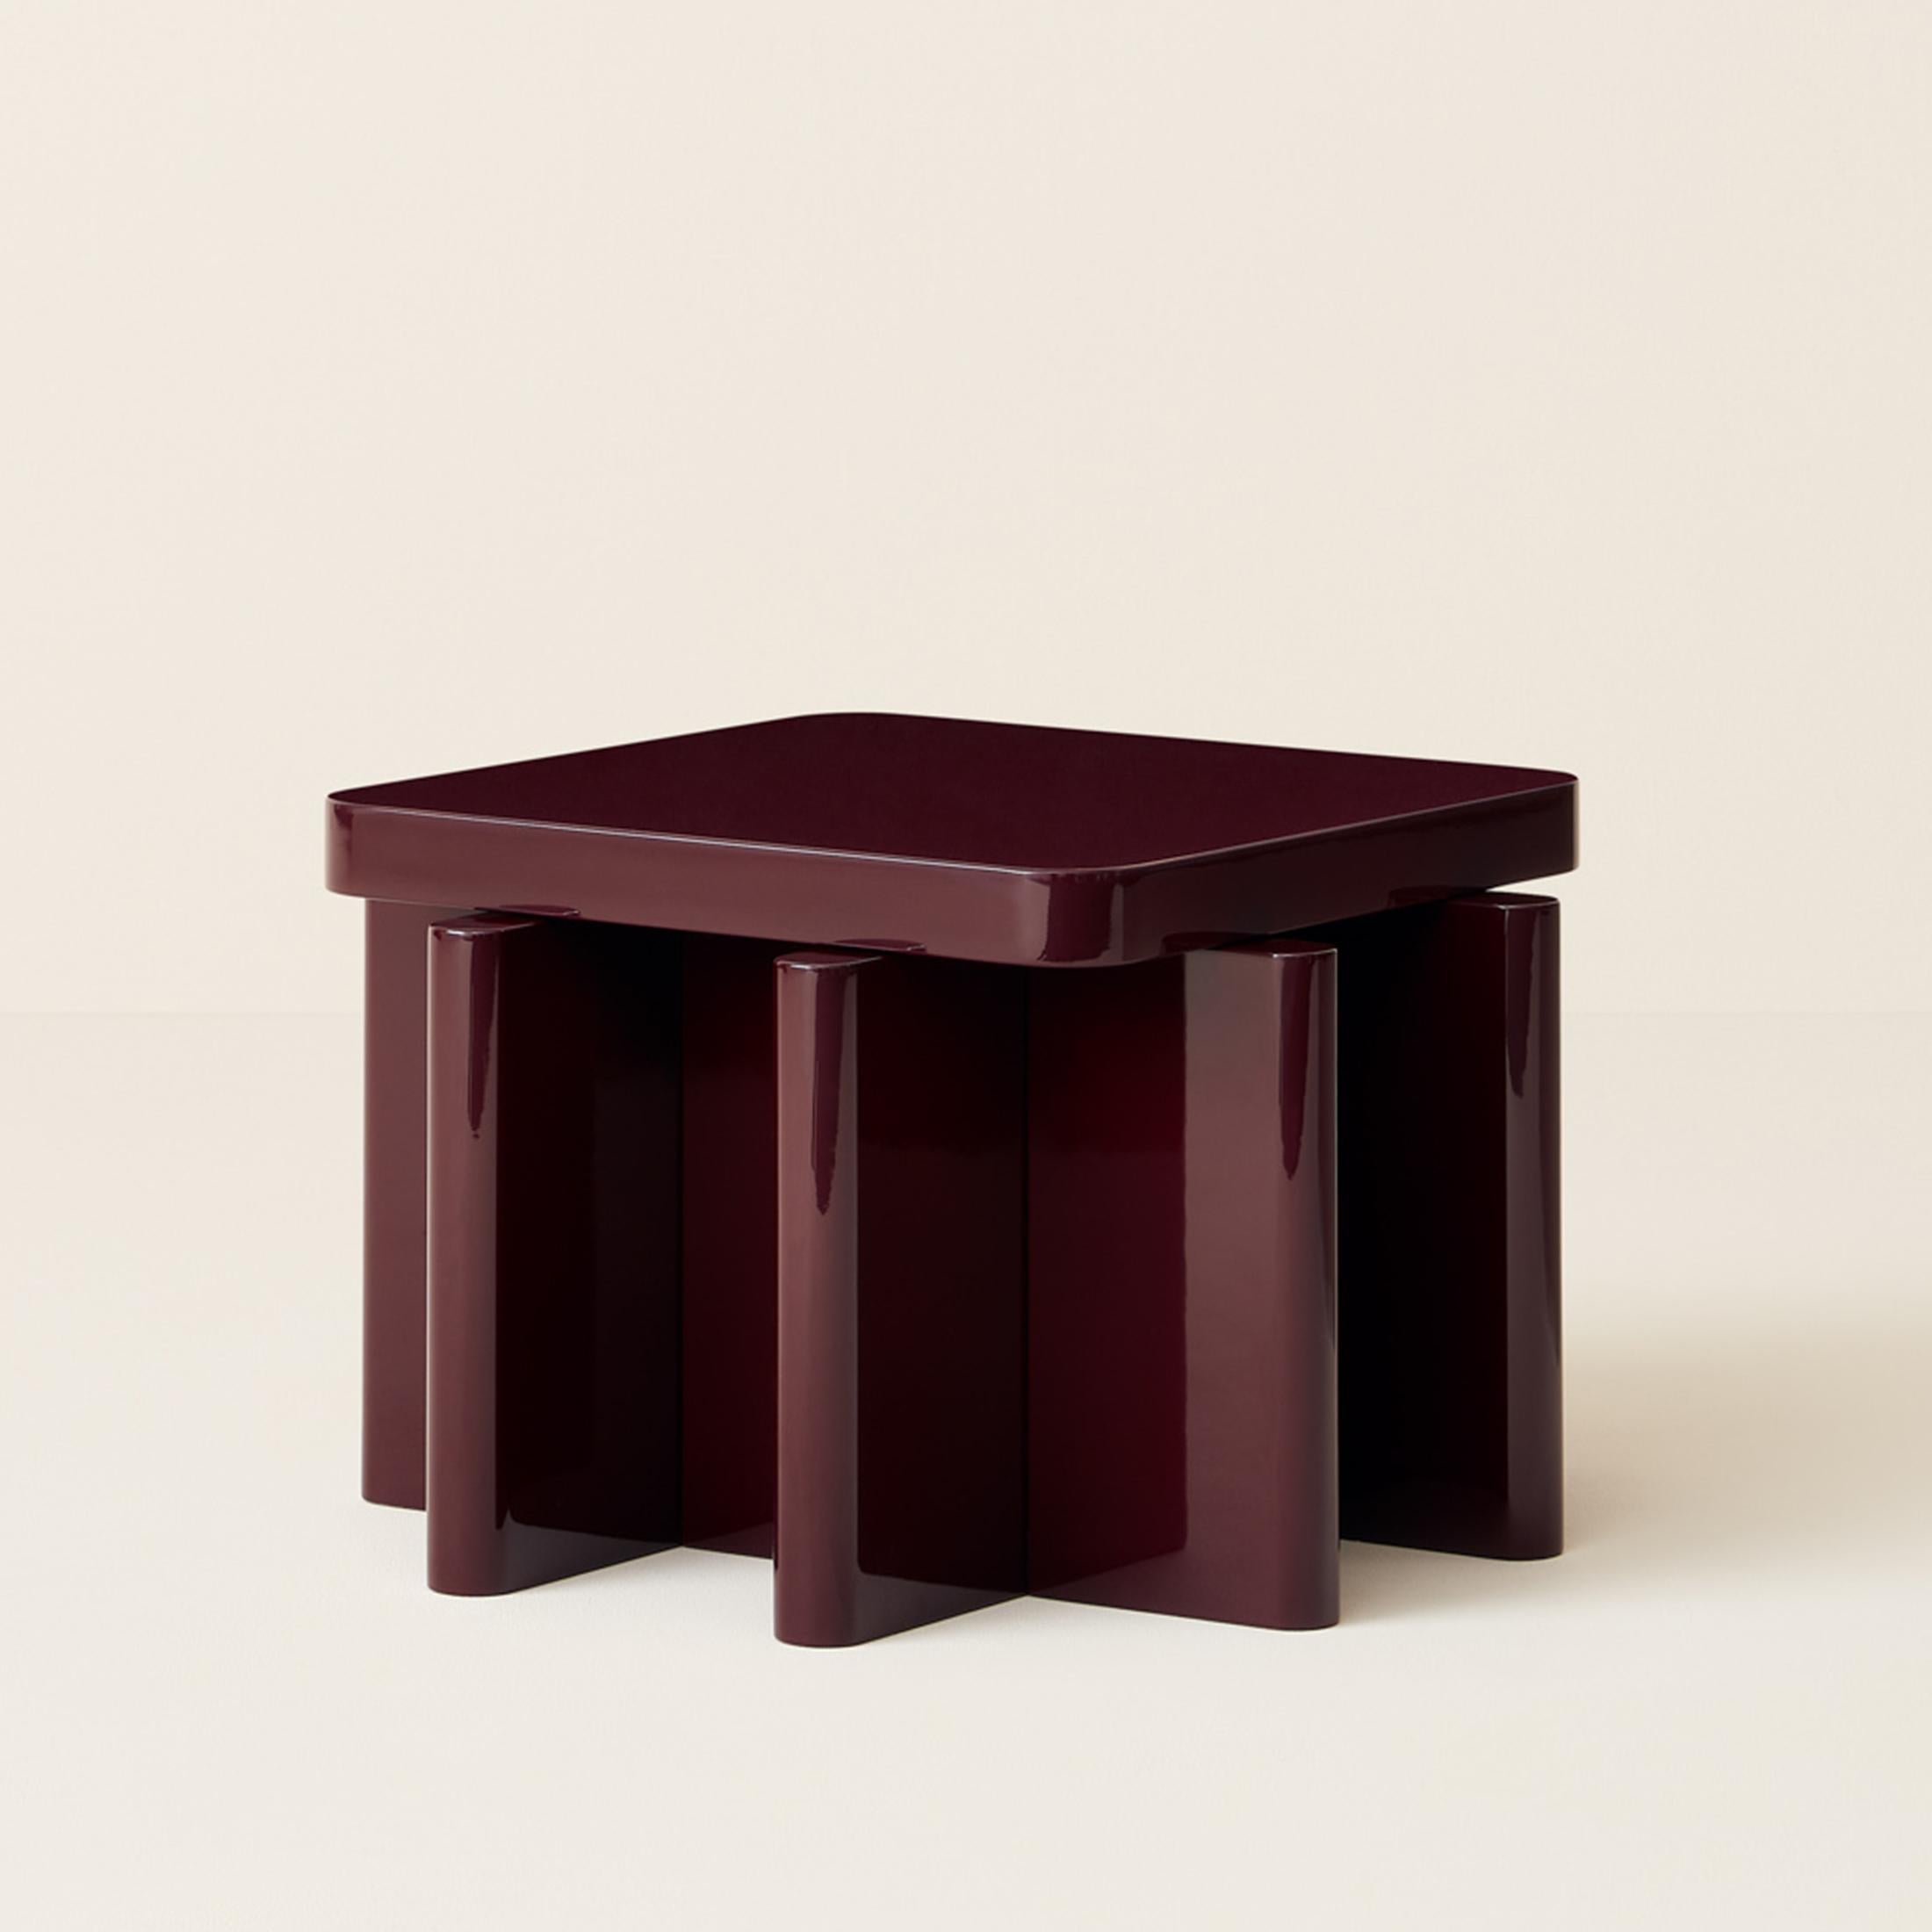 Spina T2.2 Side Table by Cara Davide
Dimensions: 65,5 x 65,5 x H 40 cm 
Materials: MDF lacquered gloss or solid European Walnut. 
Also available in: Dusty Red, Bordeaux, Caramel, Off-white, Noce Europeo.

Spina is a collection of lacquered